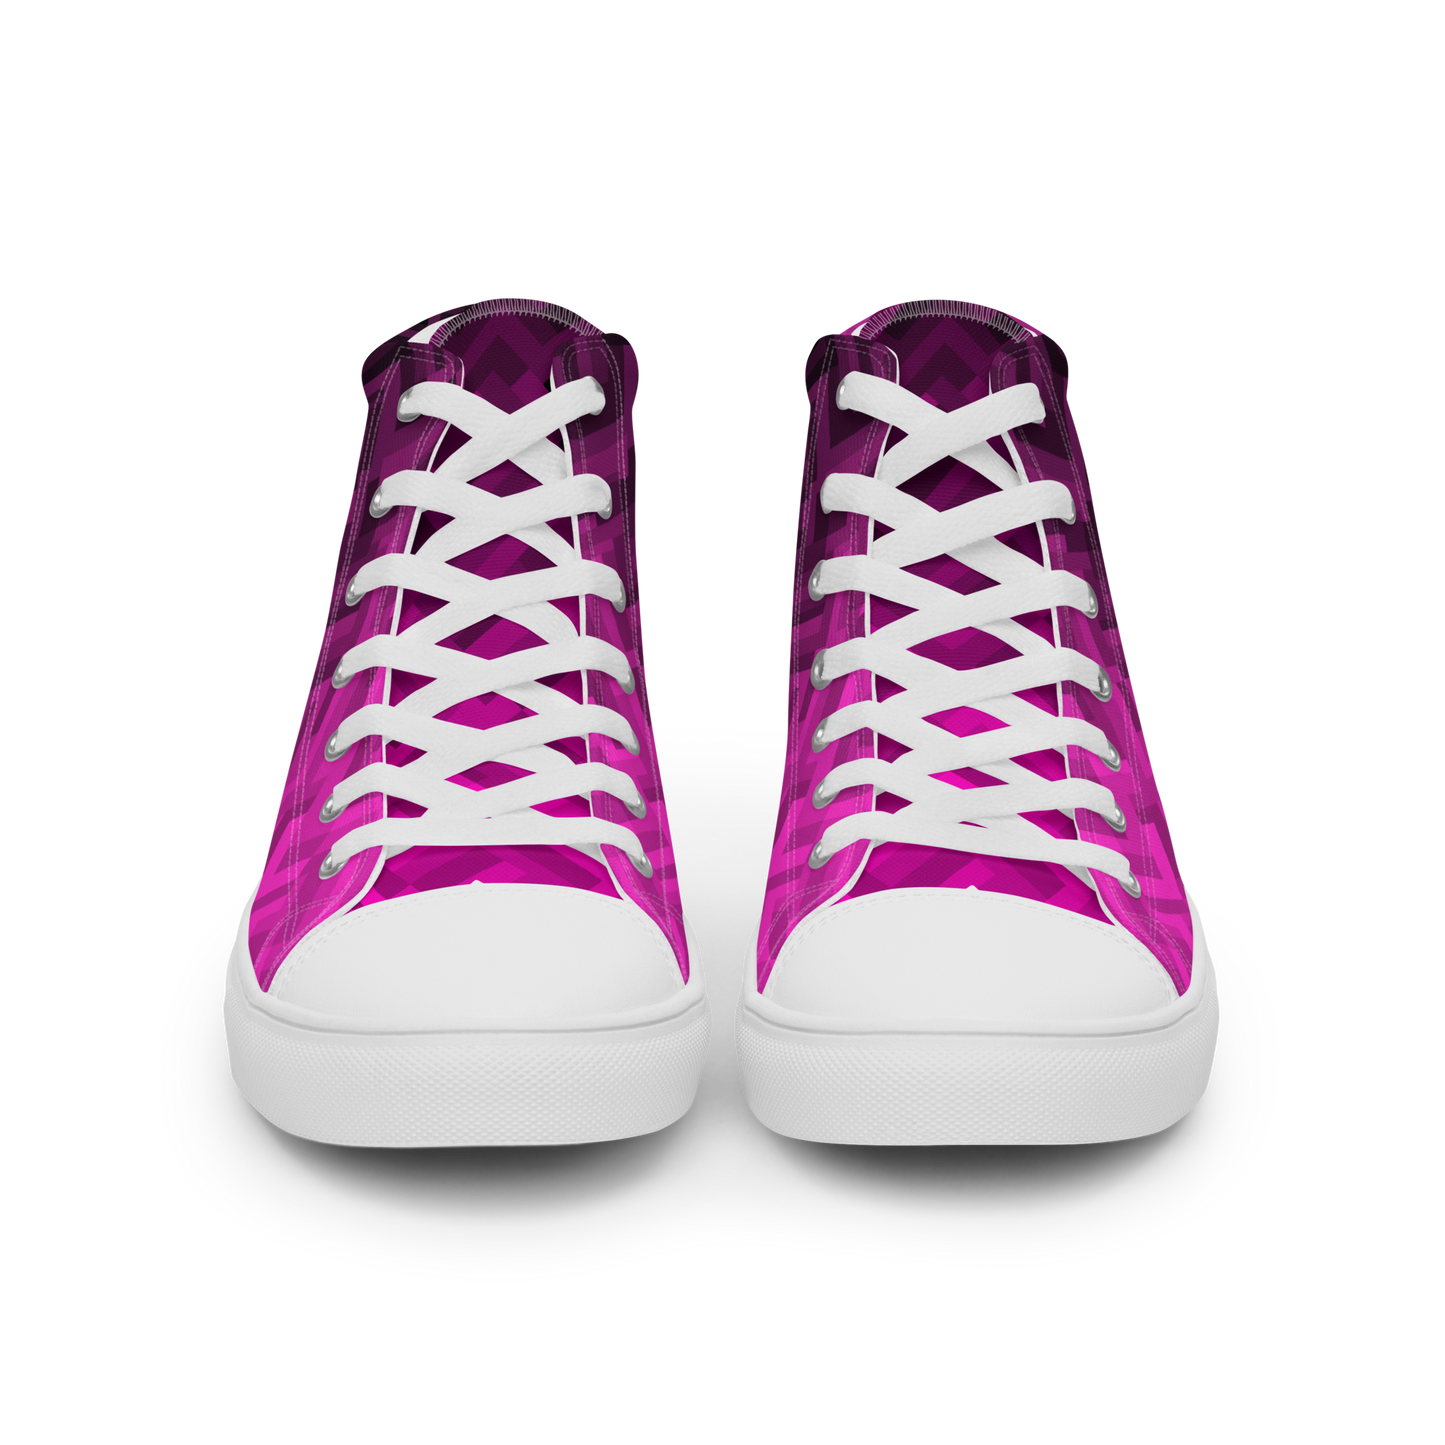 Women's Canvas Sneakers ❯ Polygonal Gradient ❯ Hollywood